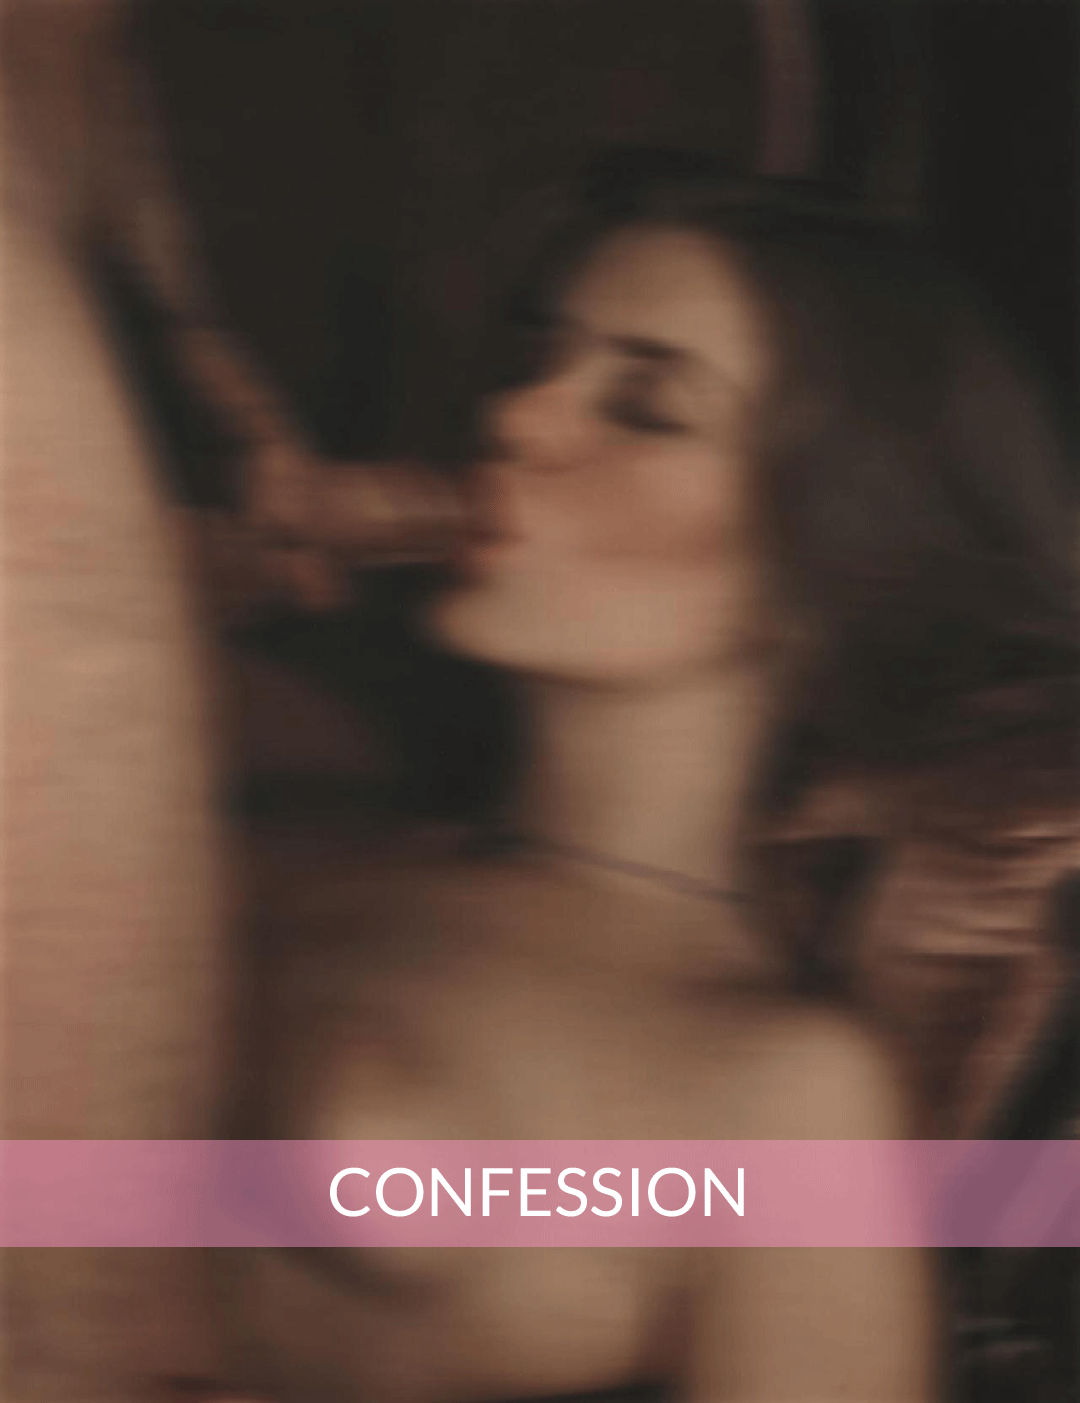 My confession by Ellie a real life sex story and naughty confession image